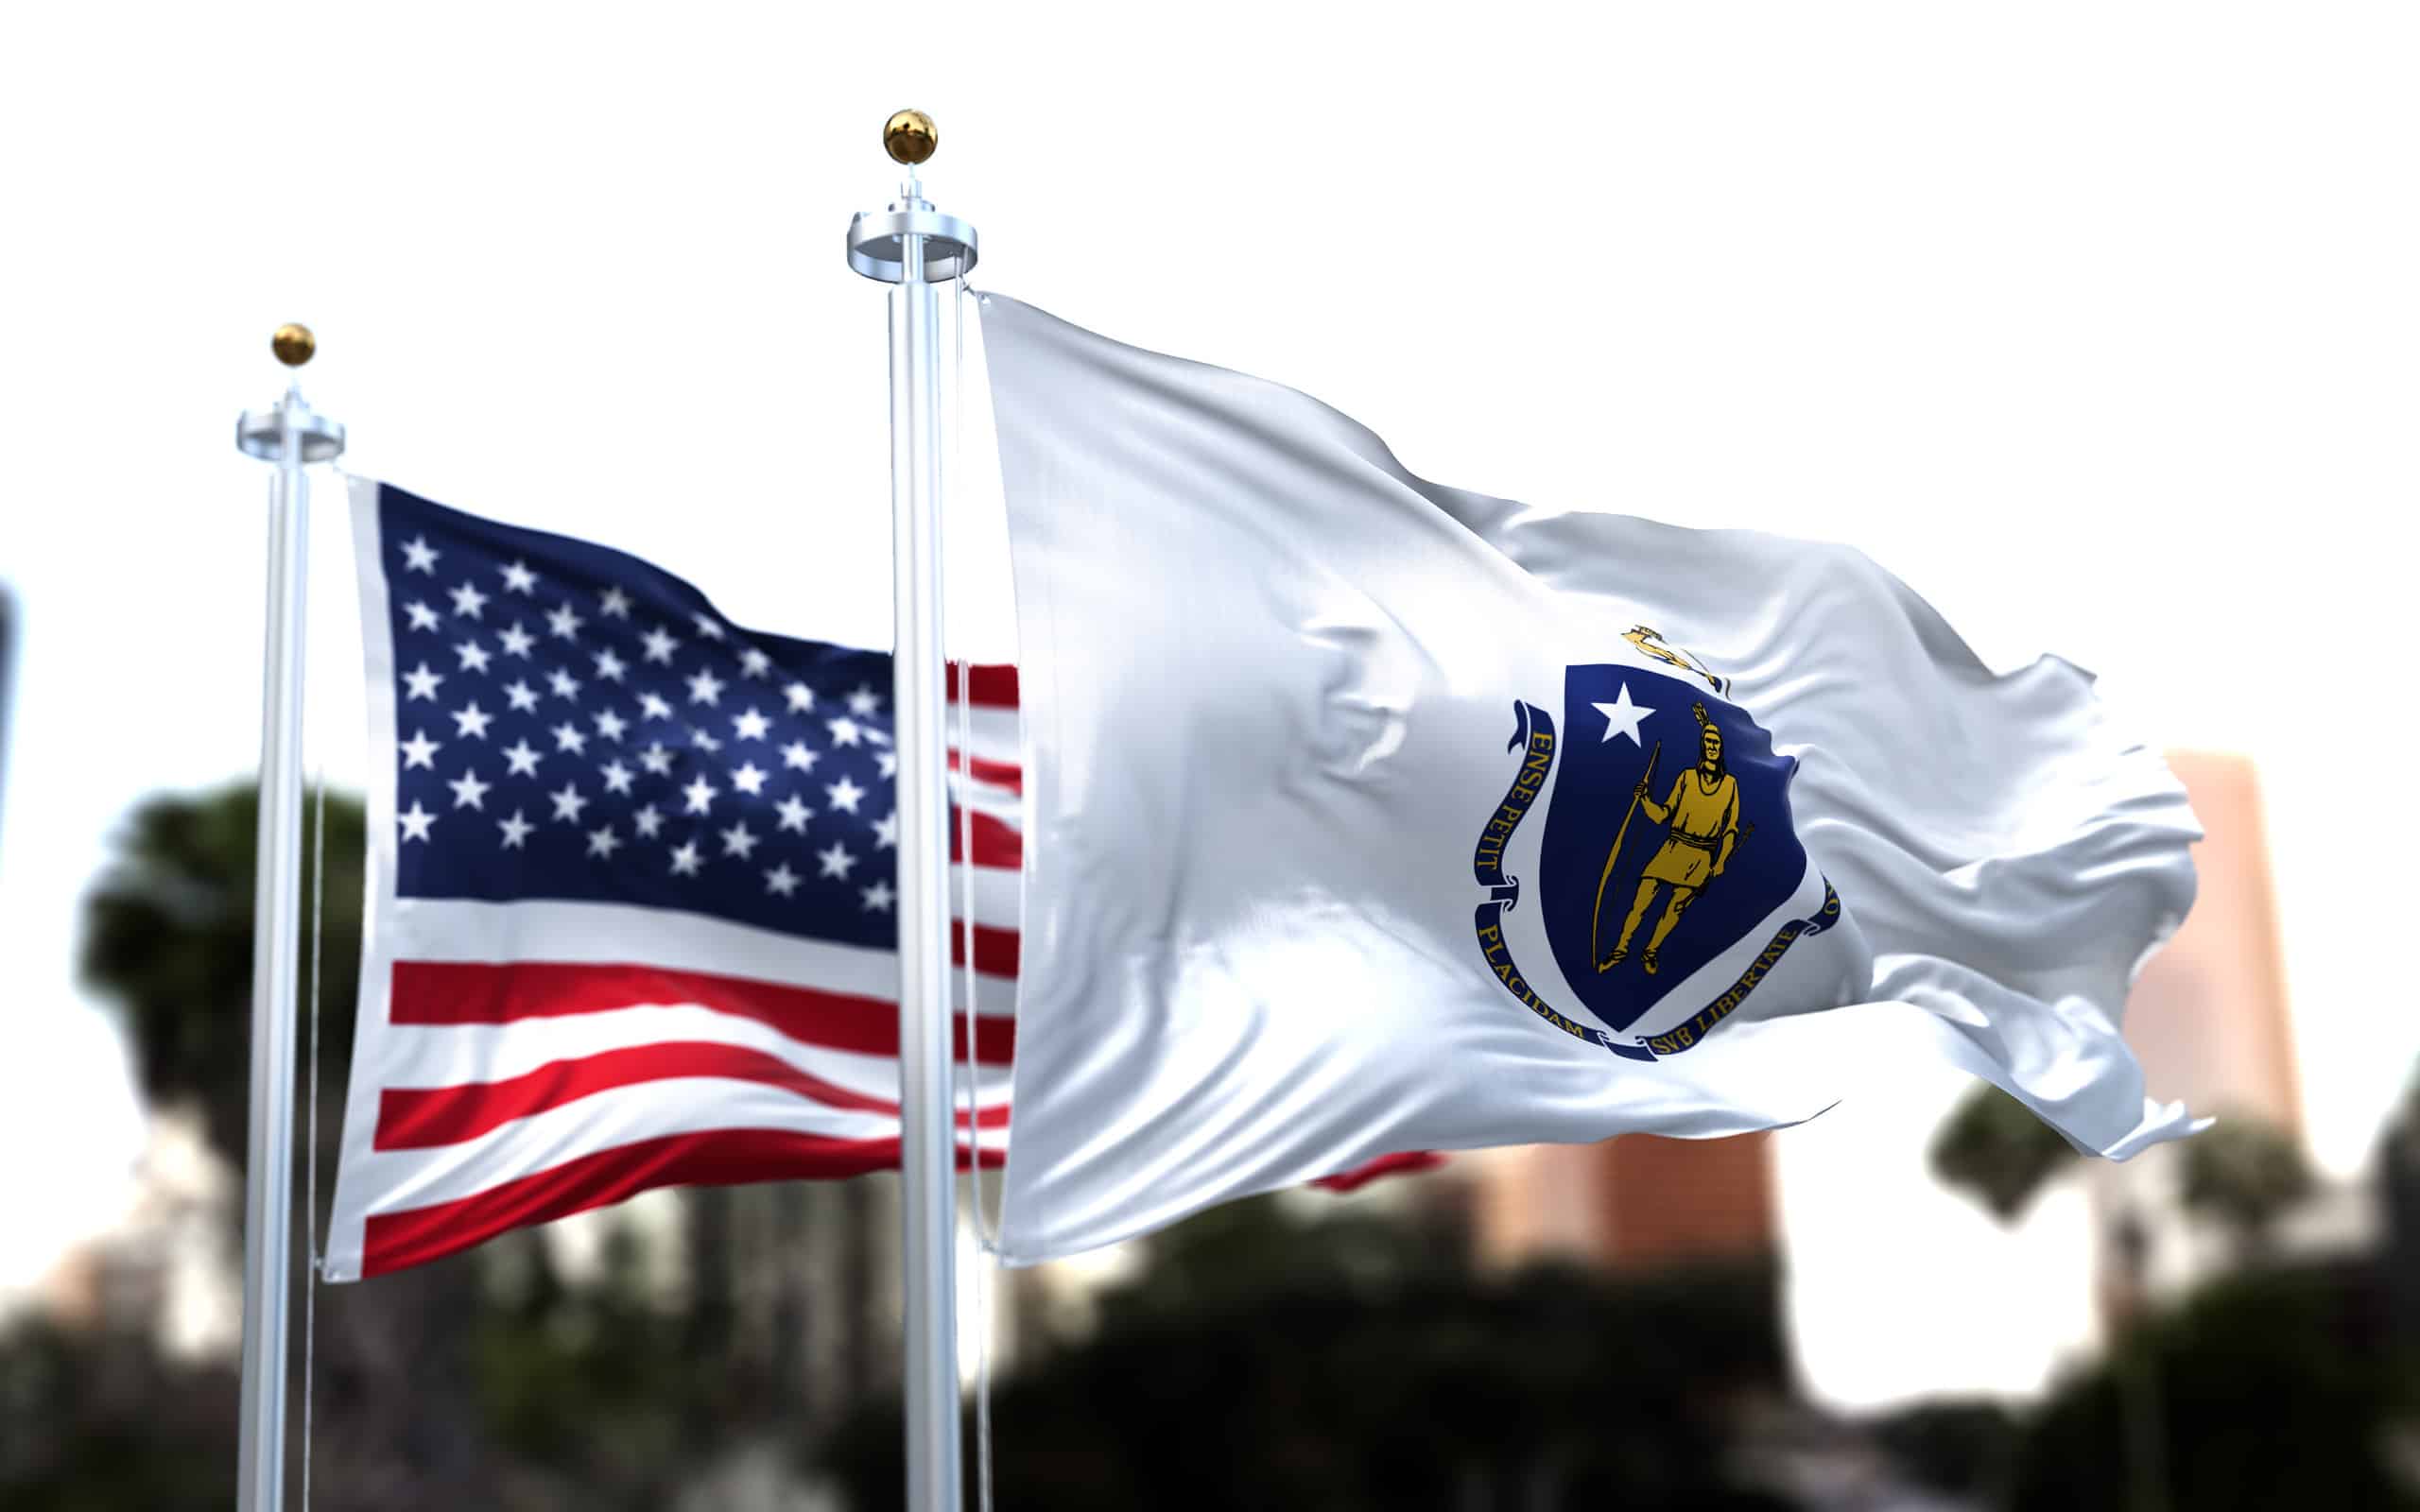 the flag of the US state of Massachusetts waving in the wind with the American flag blurred in the background